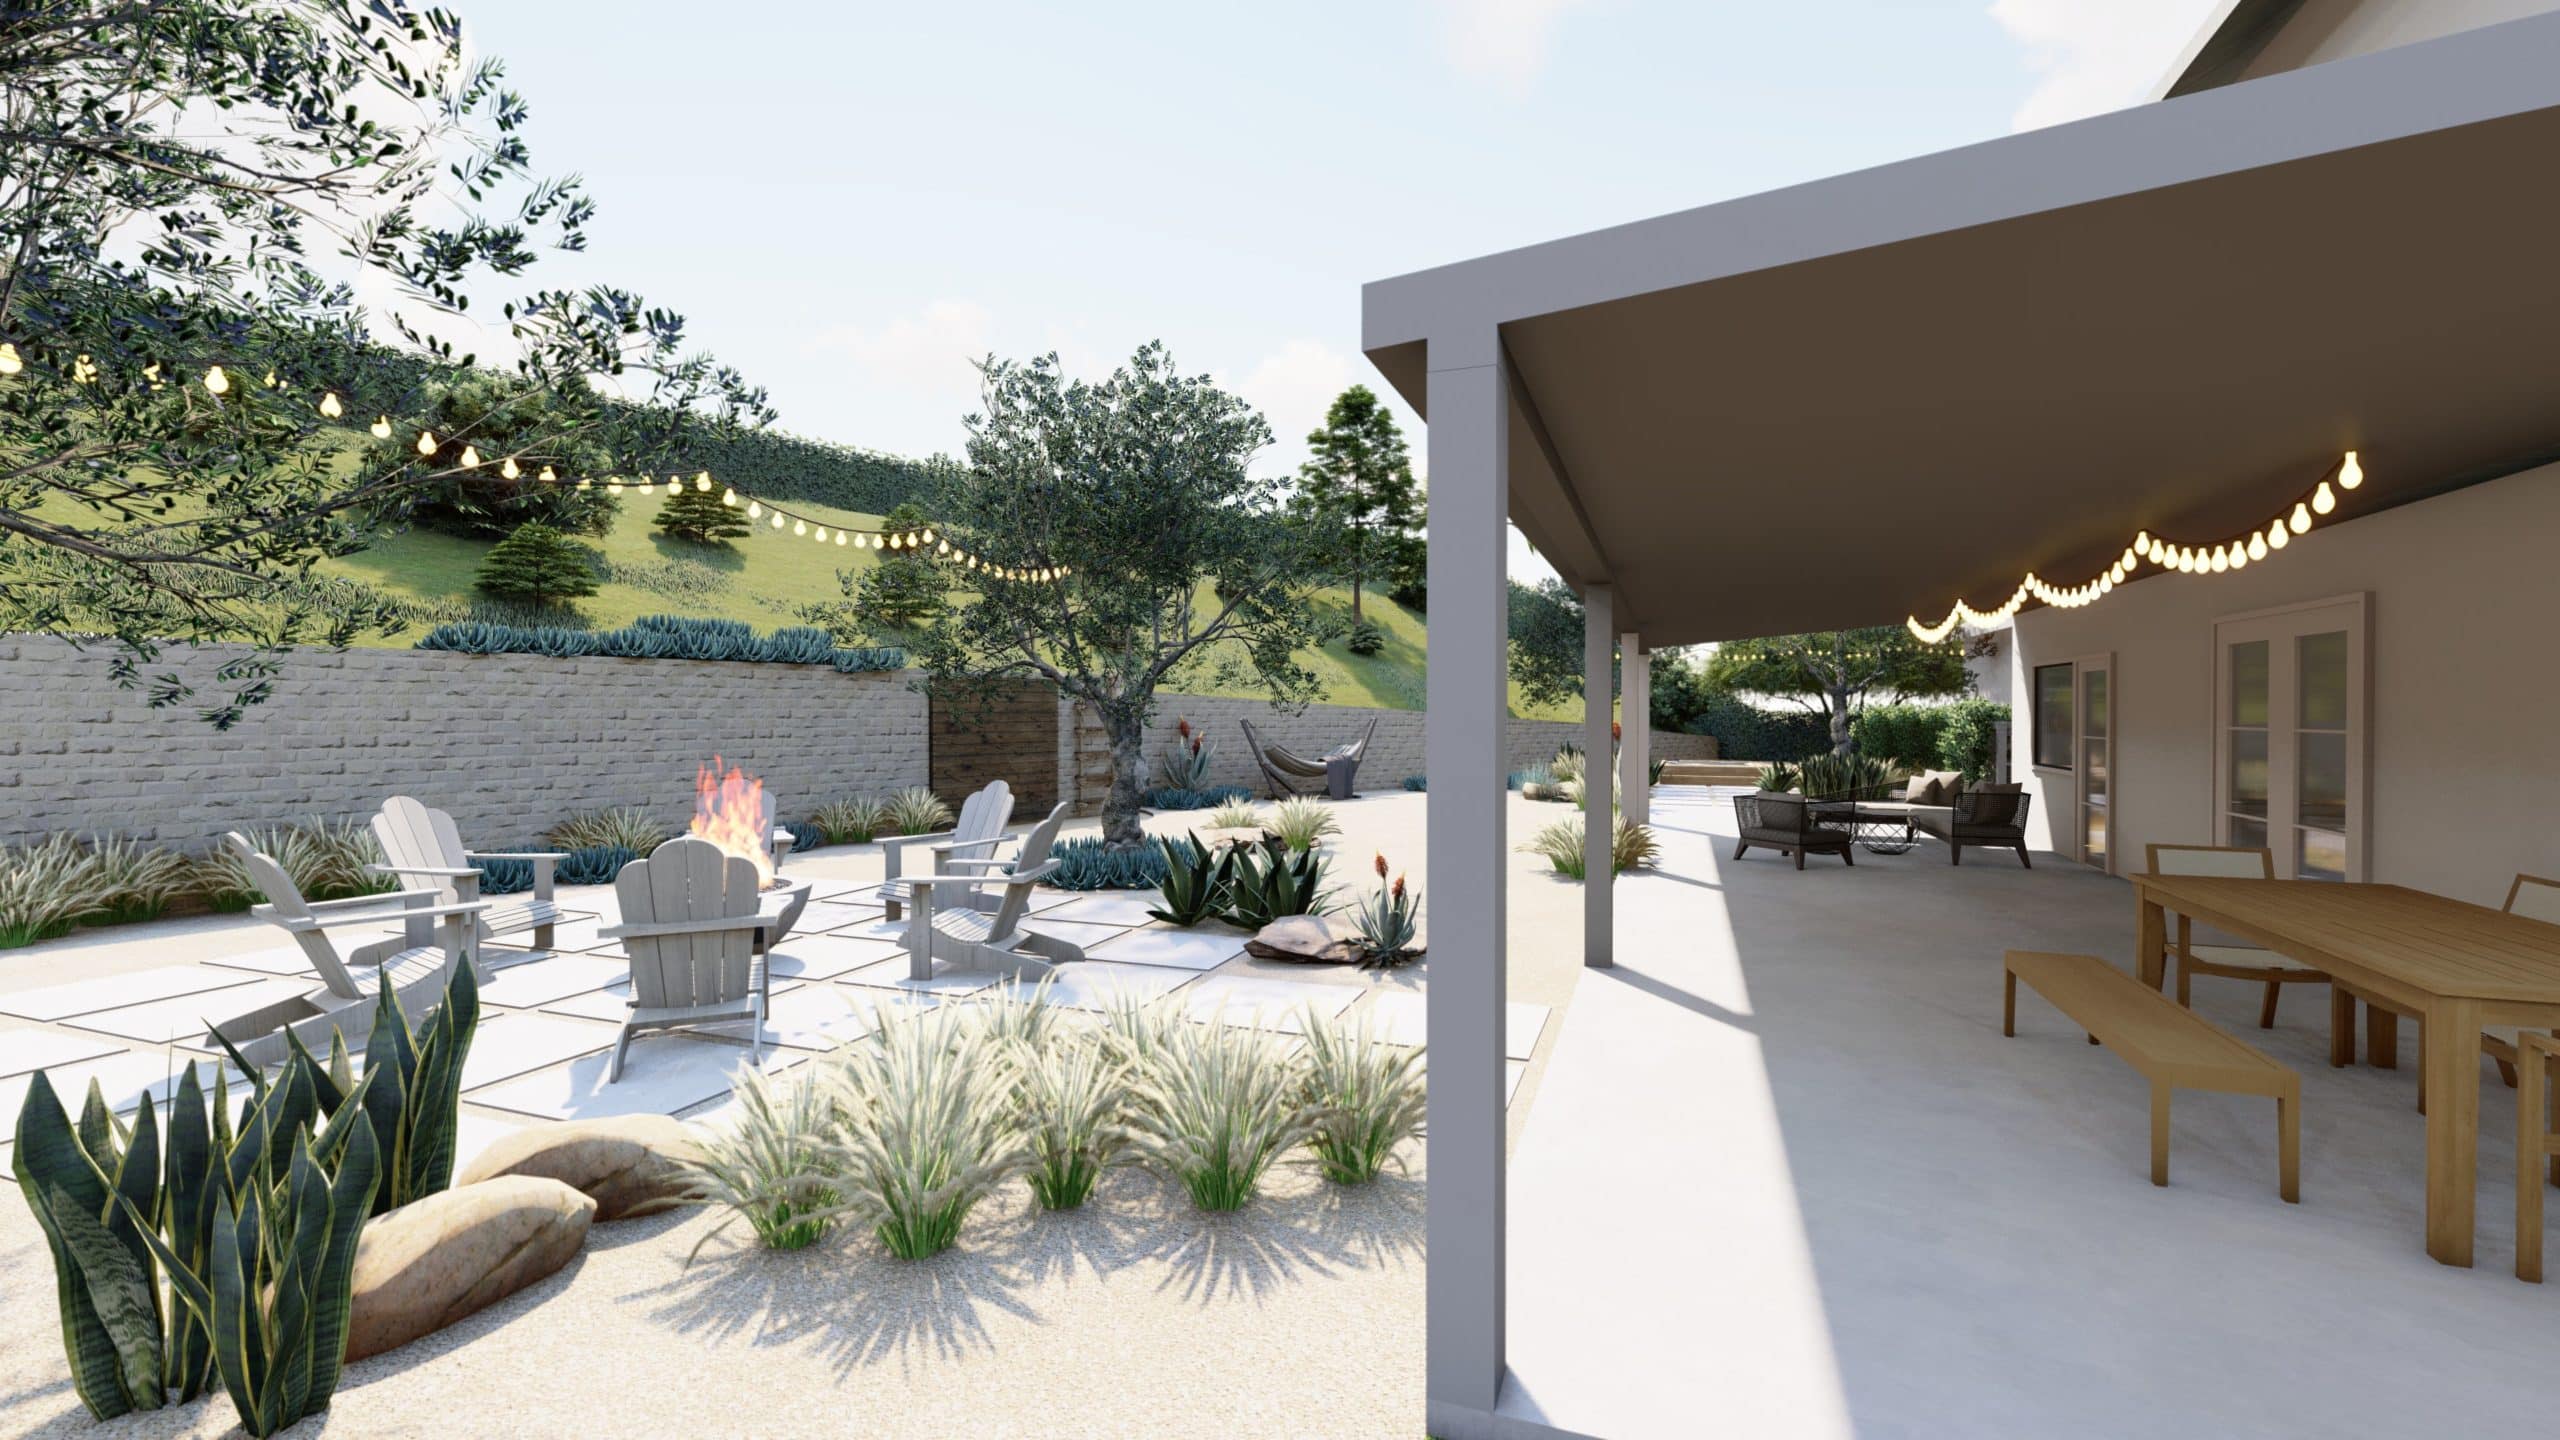 3D design render of yard with covered outdoor dining area, fire pit seating area, and retaining wall